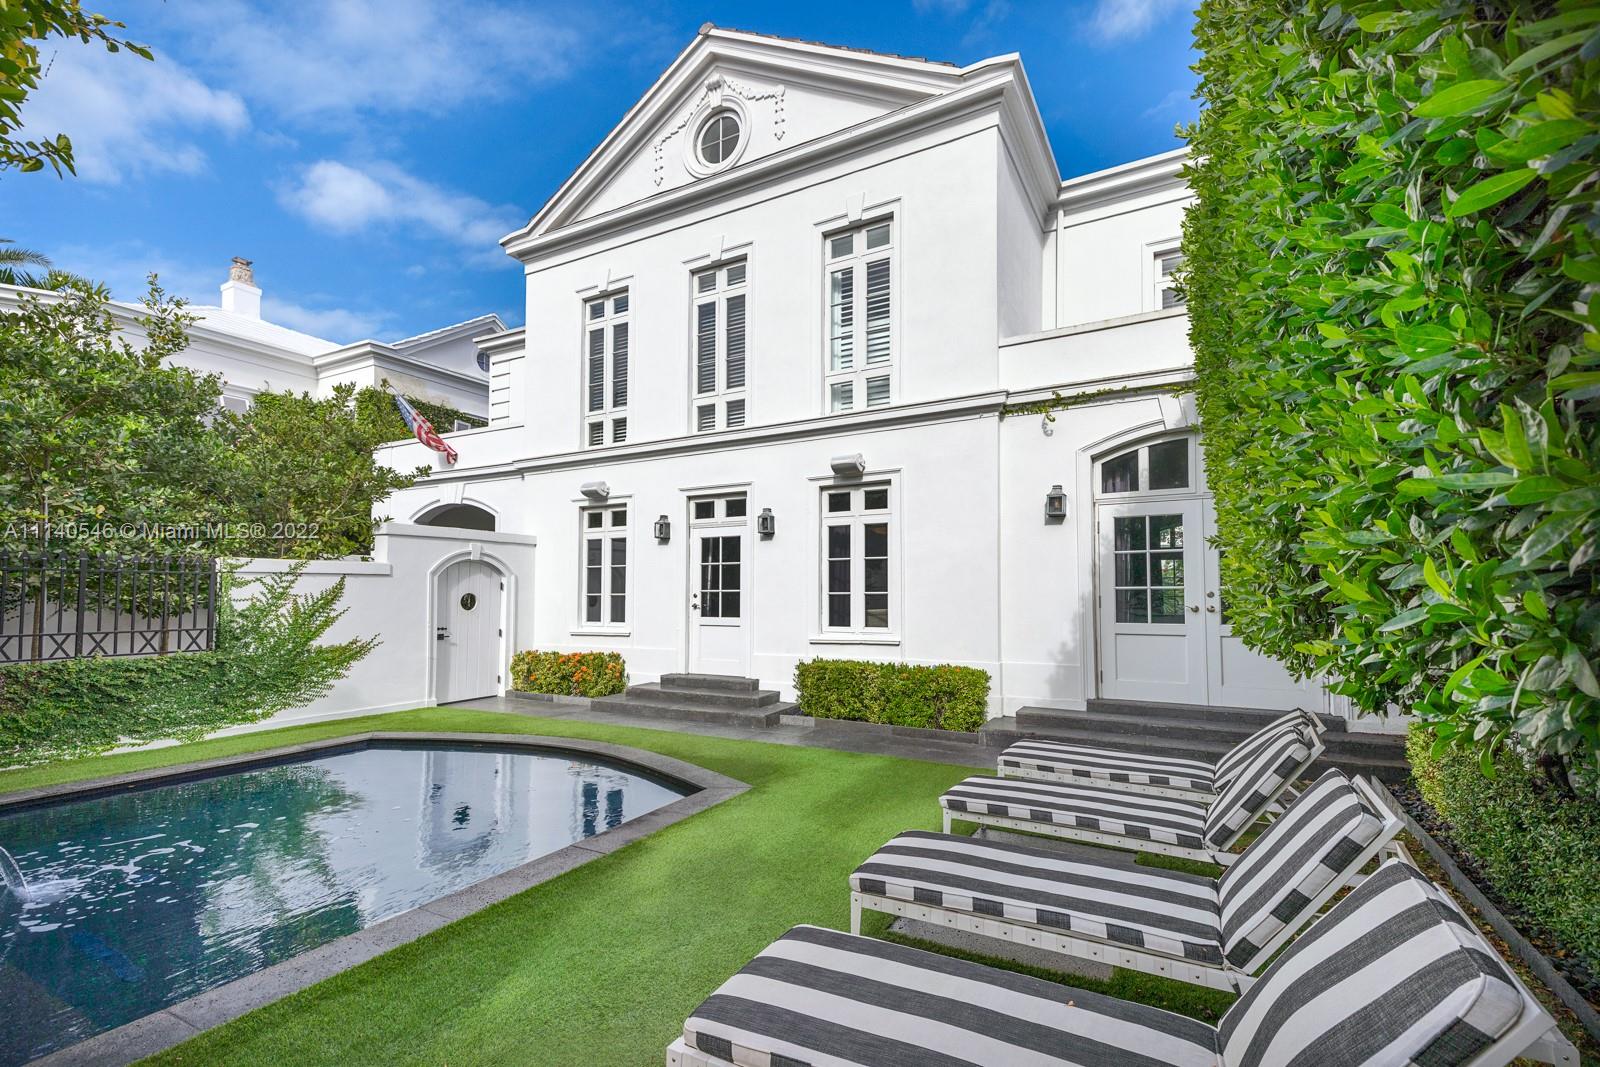 The epitome of chic, this landmark home located in the historic French City Village of Coral Gables features 4 beds + 4.5 baths. Designed by Angelo Rodriguez of Angelo Gerard Group this bold yet quaint home has vivid designs throughout. Complete with substantial renovation, the formal dining encompasses art deco vibes, the living includes an avignon quartzite fireplace and wall coverings by Ralph Lauren Elitis and Contarini. The custom bar is topped with nero marquina marble . The eat-in kitchen is finished with brown Egeo marble, Waterworks hardware, Wolf oven, Bosch, and Subzero appliances. The primary bath is complete with centaurus onyx & walls of zebrino white marble and dual walk-in closets. The arched French doors open to a beautiful courtyard with a pool and black lava stone floors